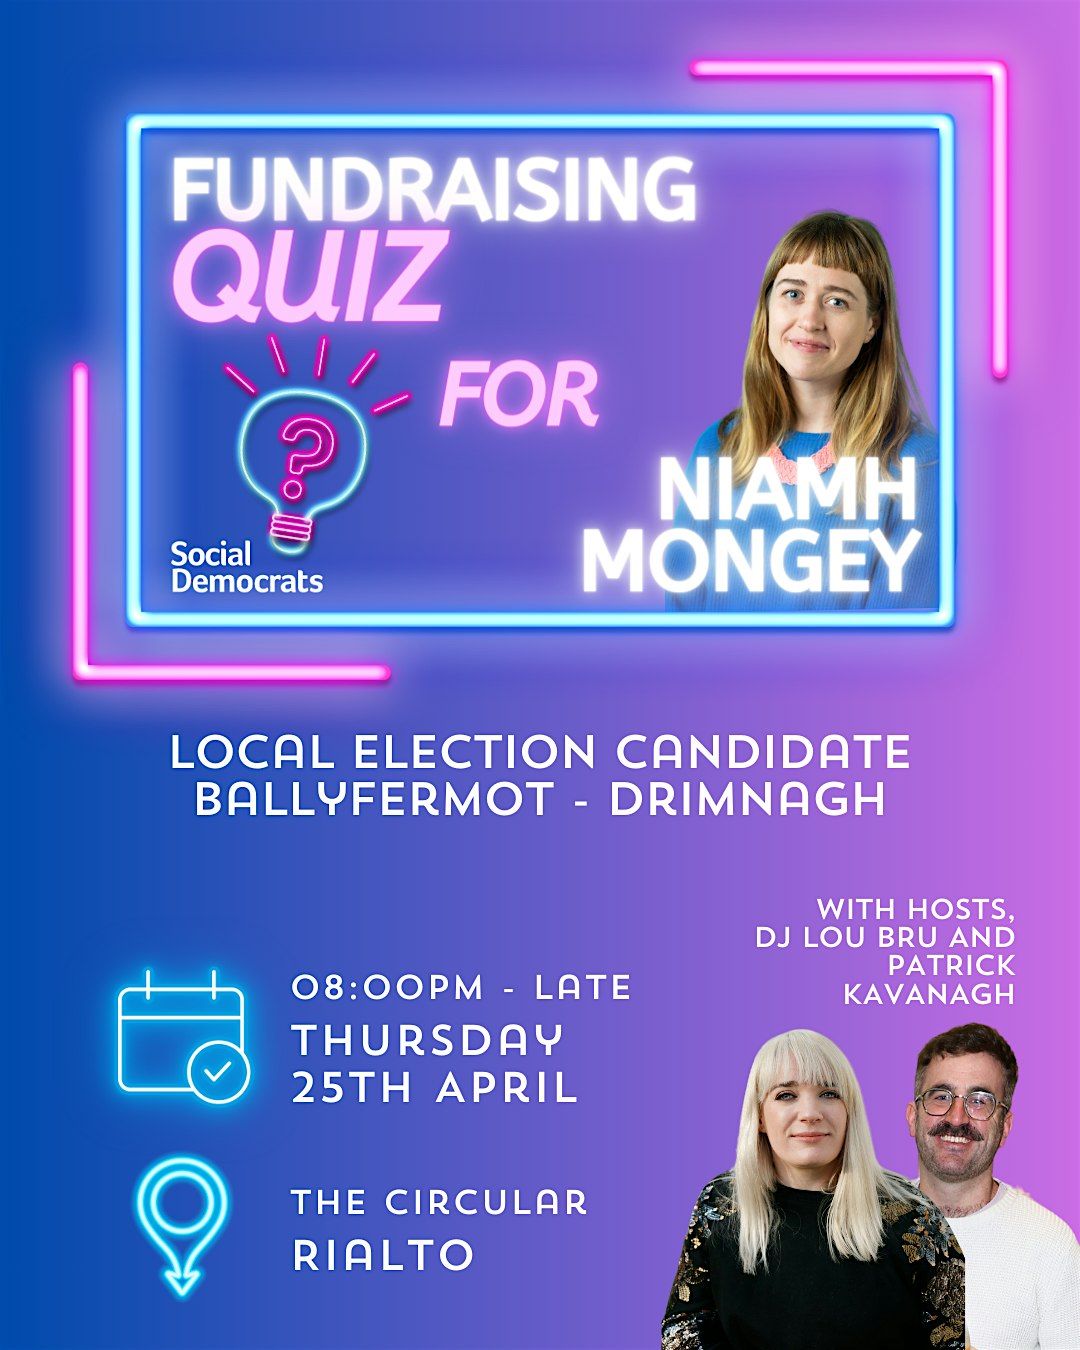 Fundraising Quiz - Support Niamh Mongey's local election campaign